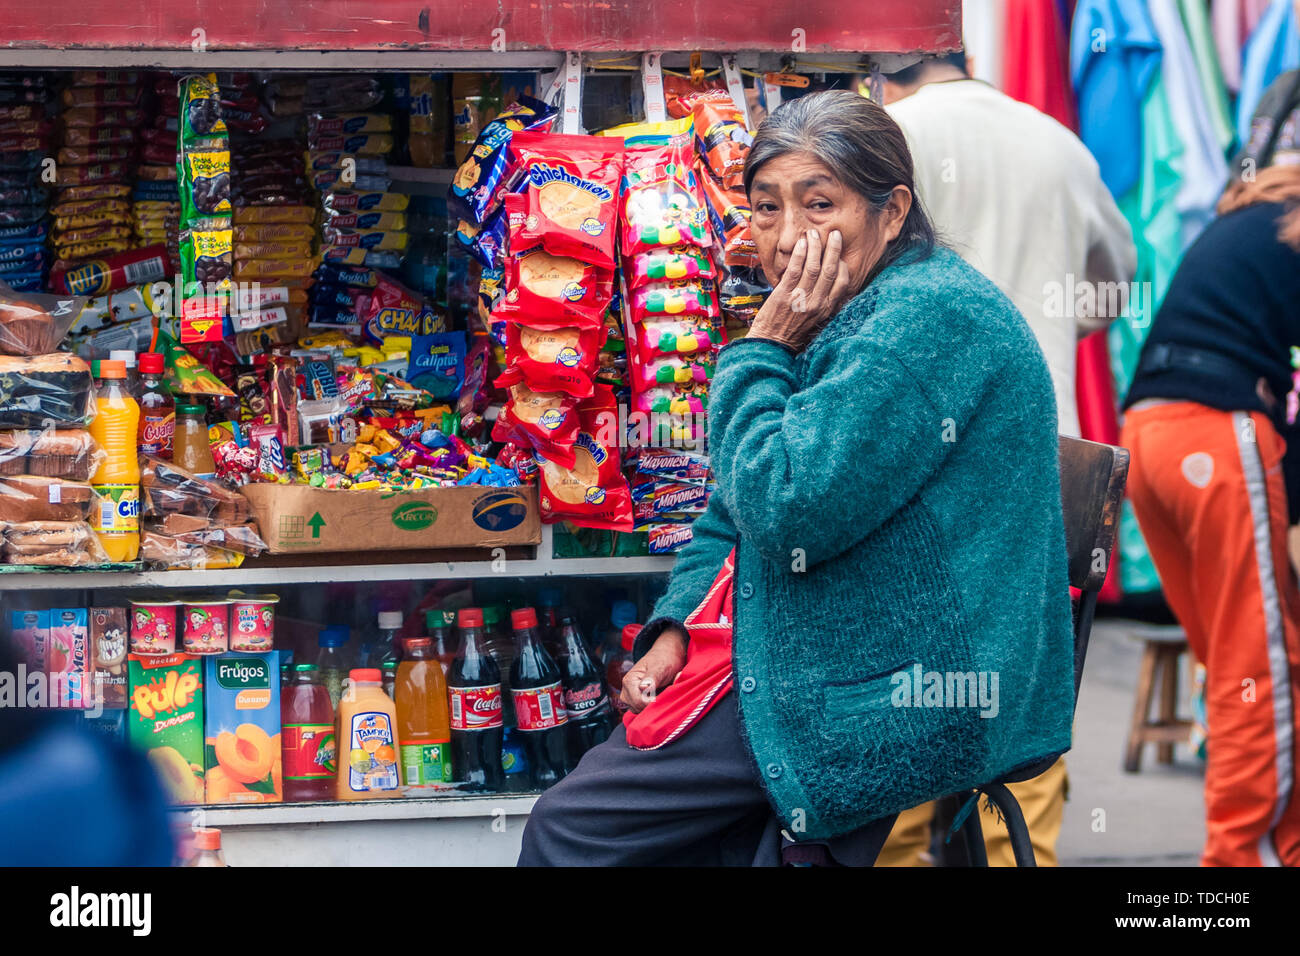 Lima / Peru Jun 13.2008: Old indigenous woman seating next to the colorful Newsstand on the street of the biggest garment district called Gamarra. Stock Photo